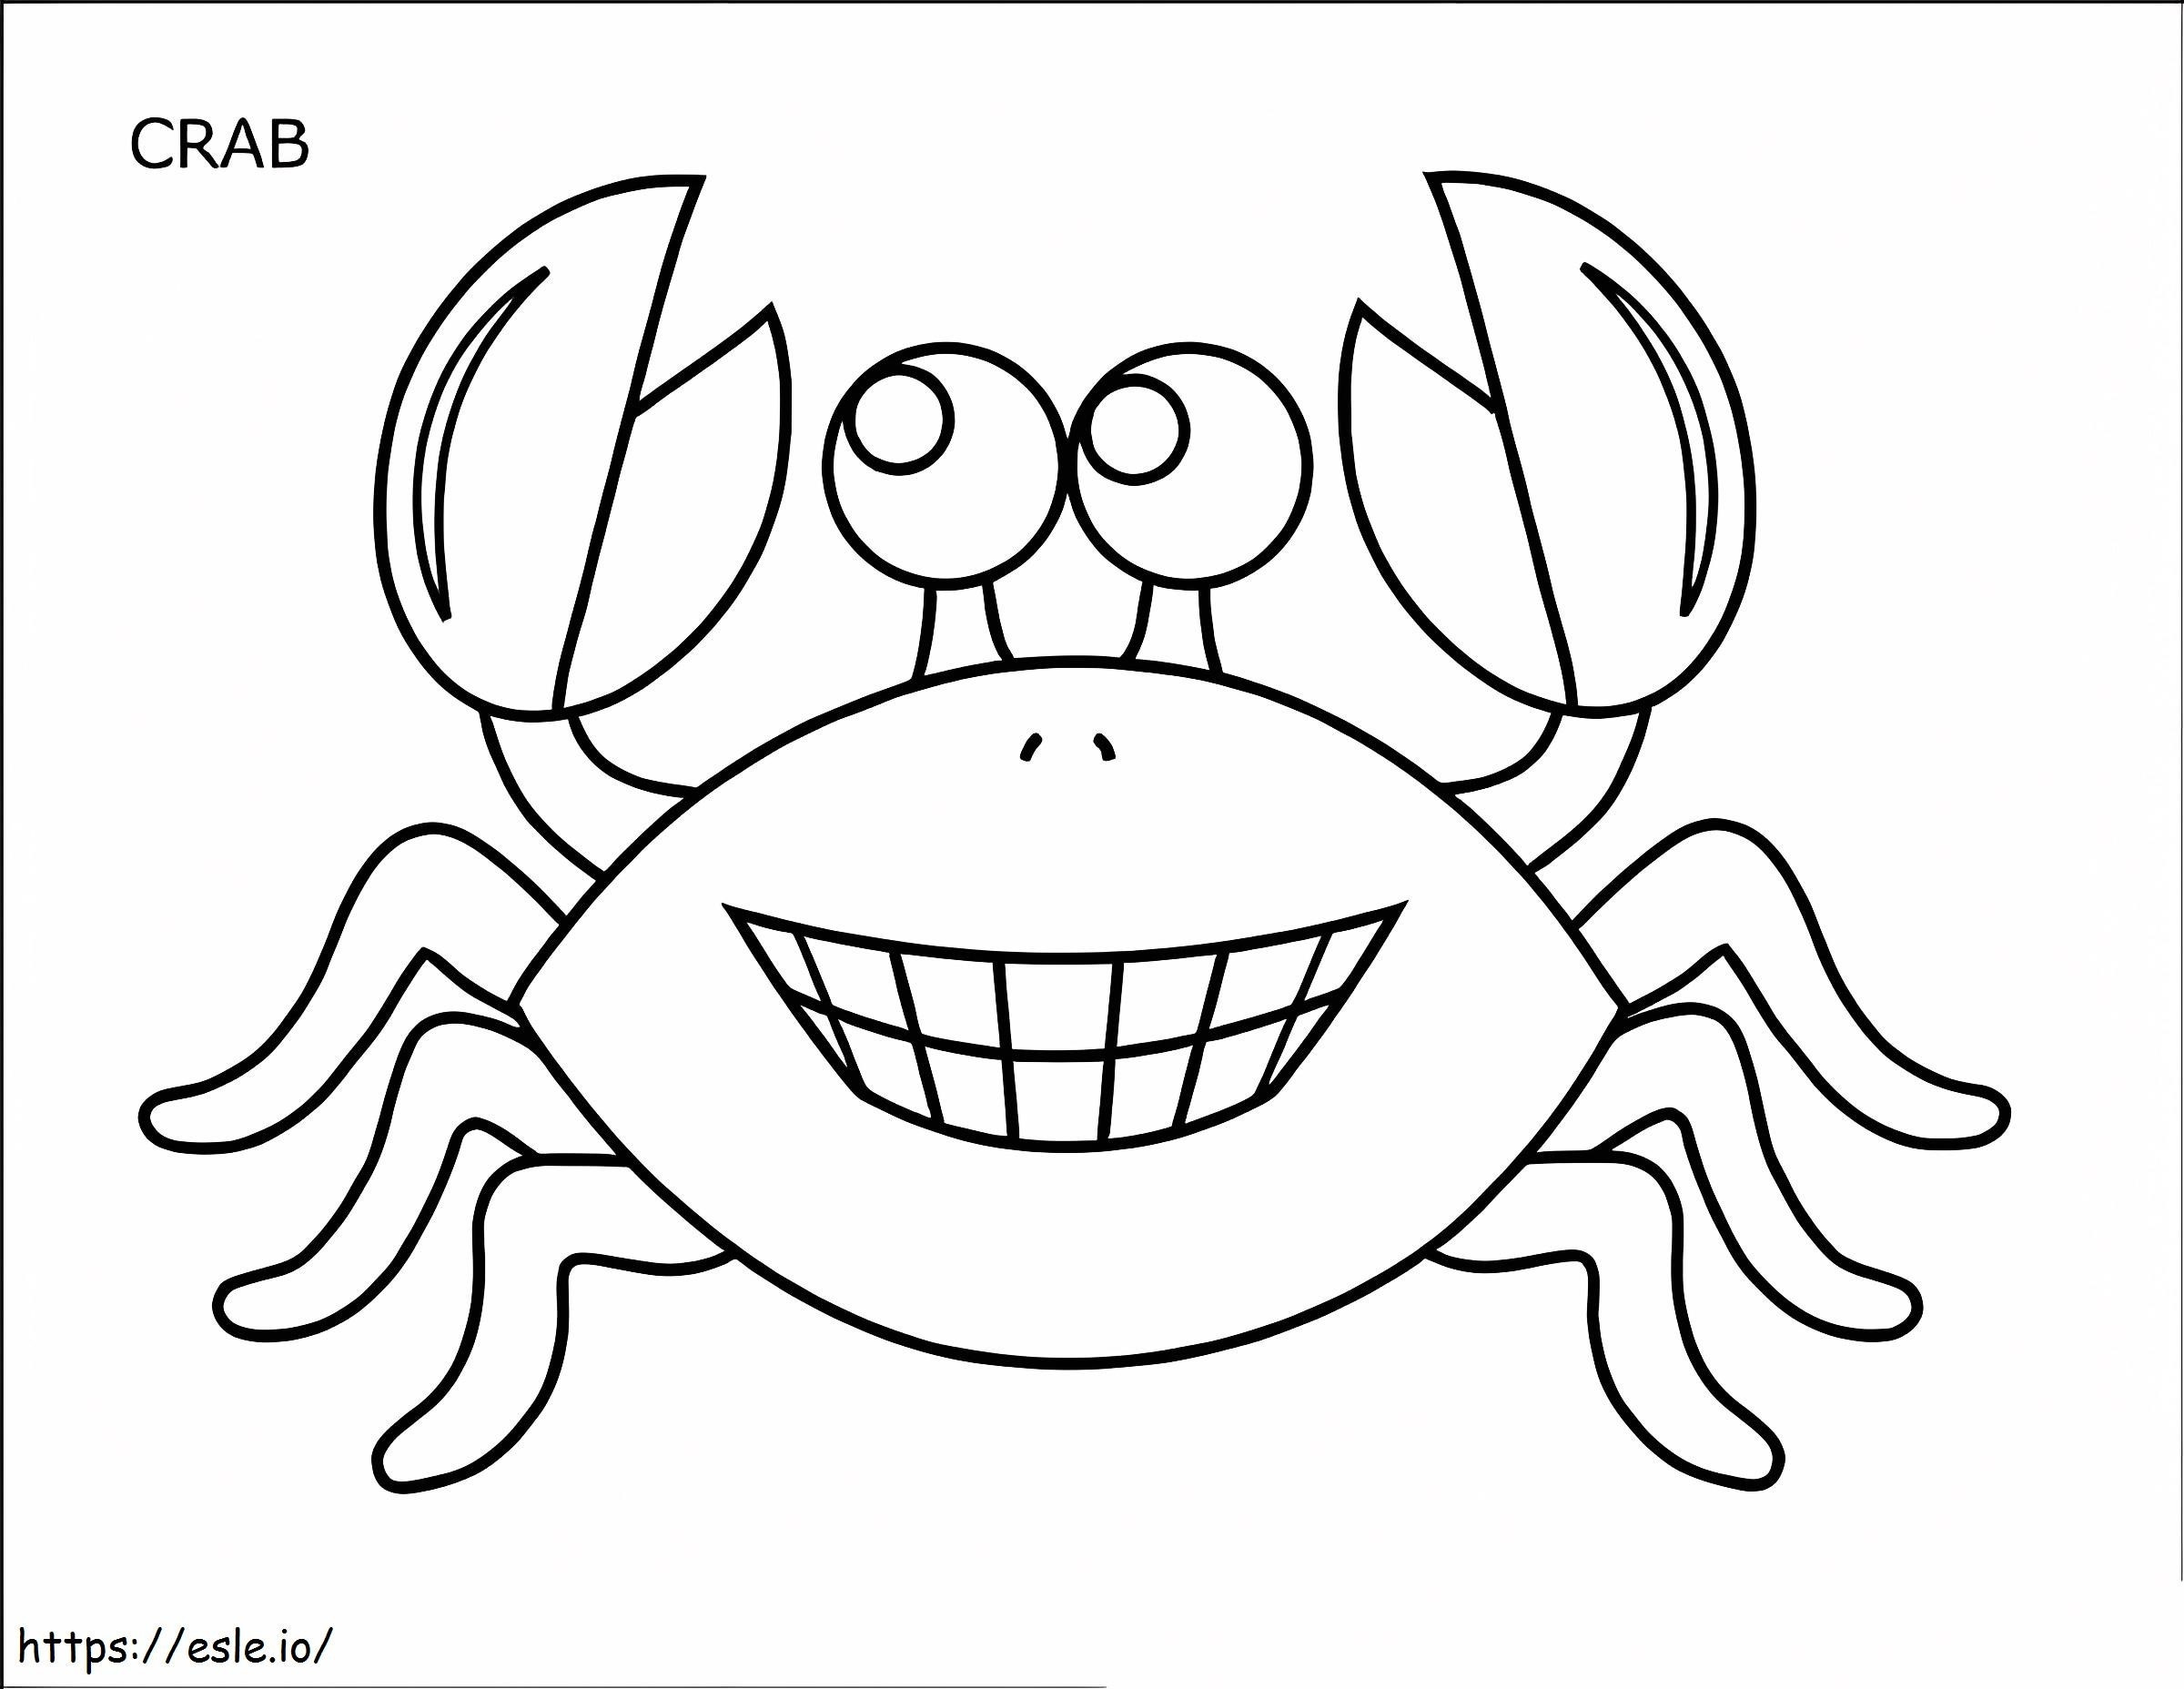 Crab 2 coloring page